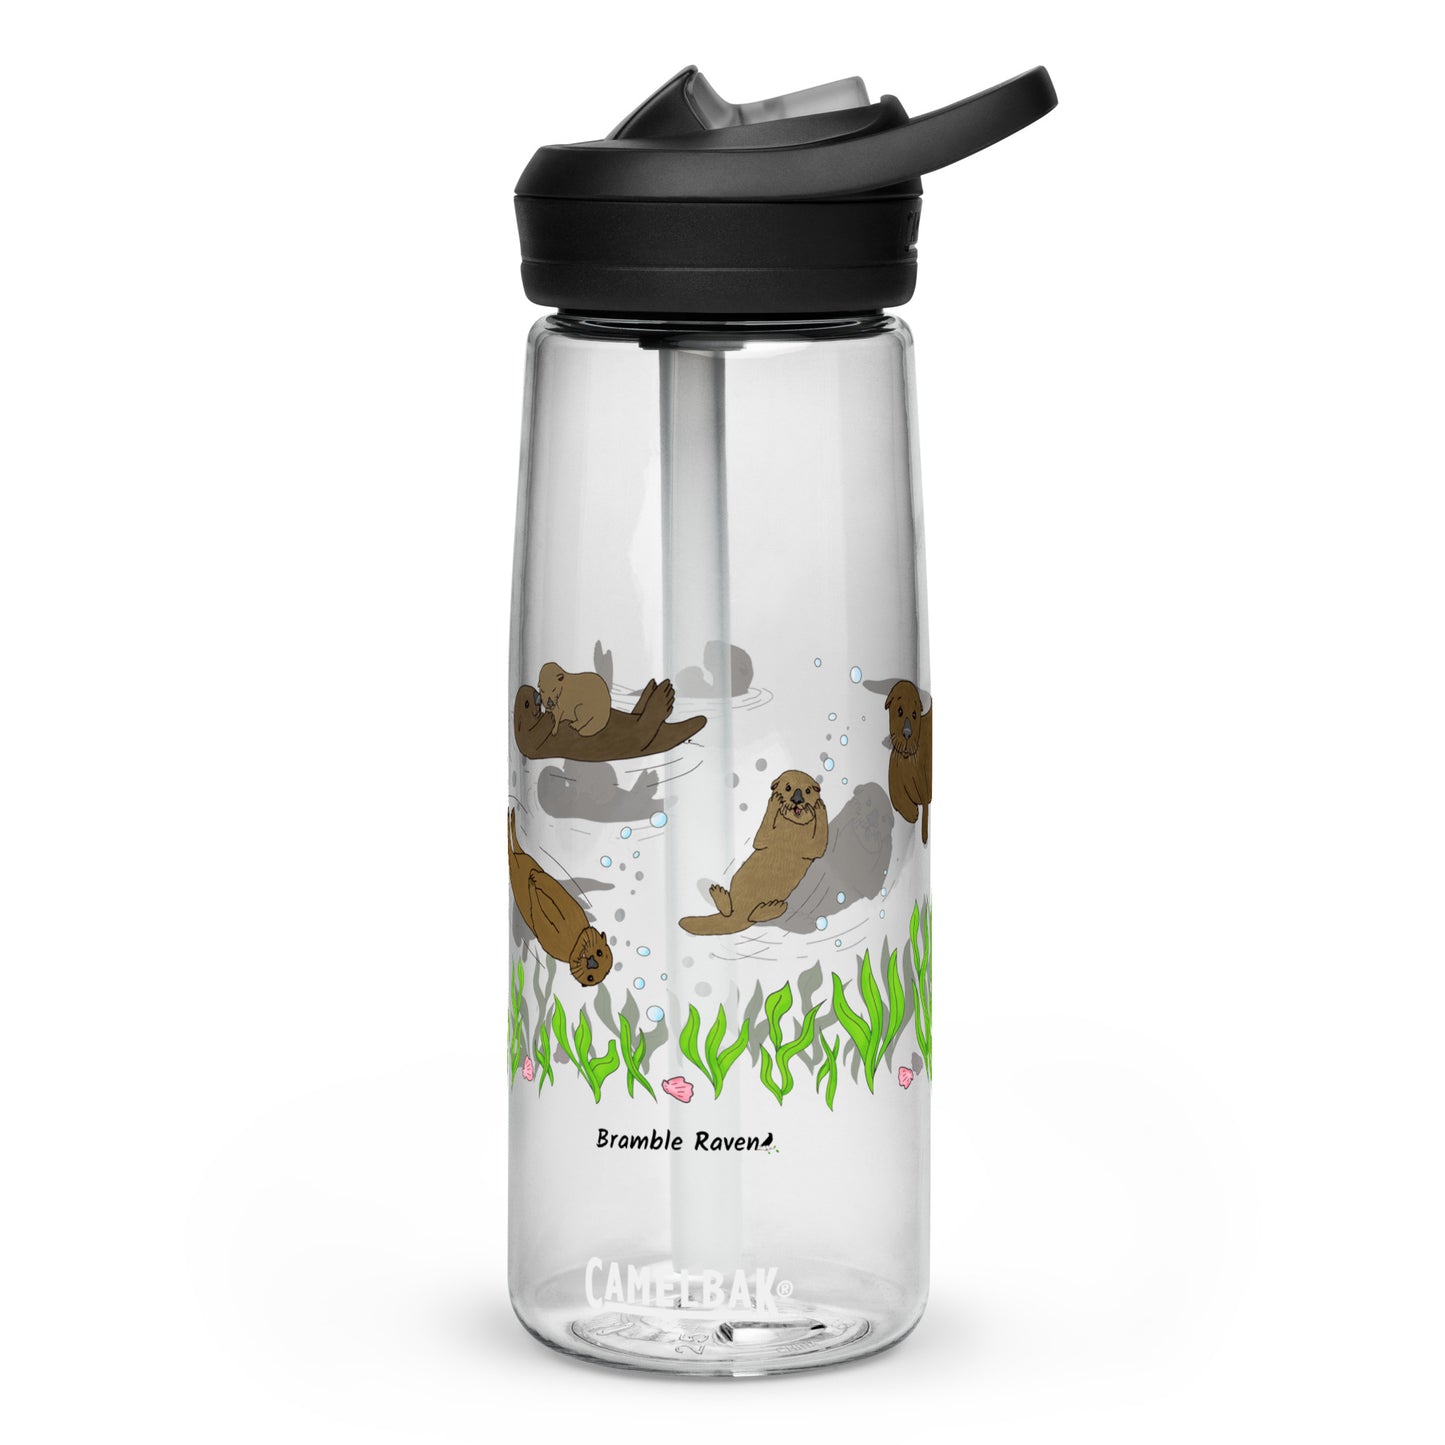 25 ounce sports water bottle with spill proof lid and bite valve. Clear stain and odor-resistant BPA-free plastic with sea otter designs around the bottle, swimming above the seaweed and shells.